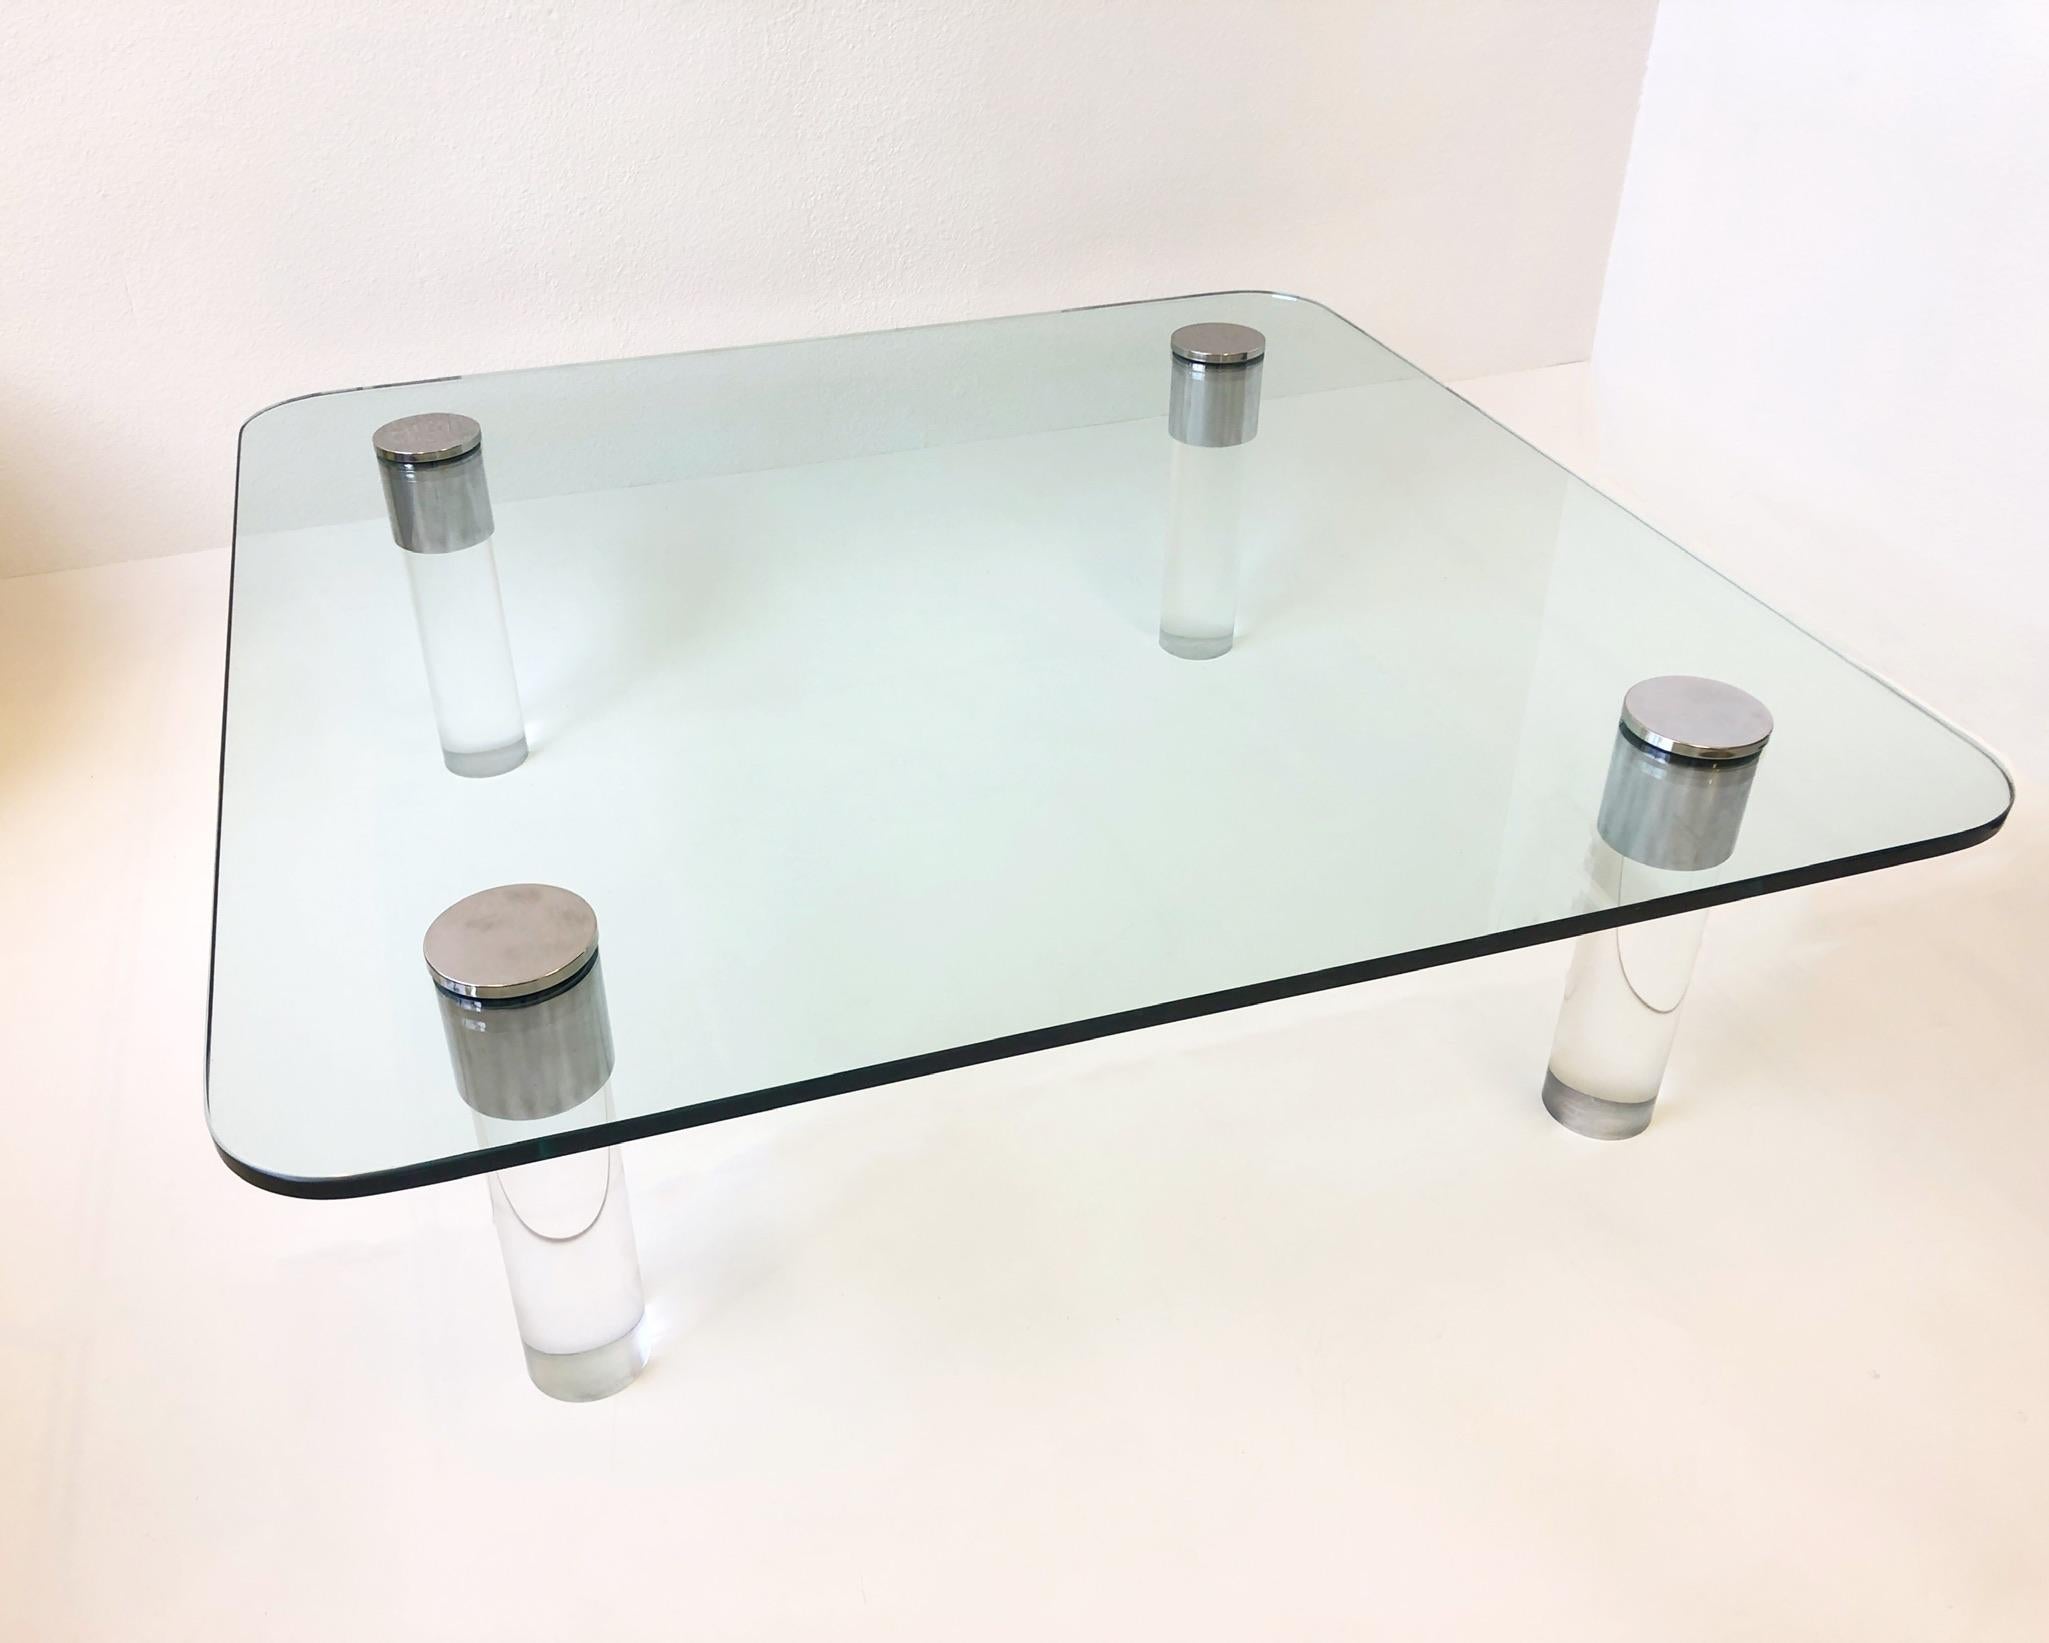 Large 1970’s lucite and chrome with 3/4” thick glass top cocktail table by Pace Collection.
The legs have been newly professionally polished.
The glass is original, has no chips, shows minor wear consistent with age.
Measurements: 54” wide, 54”